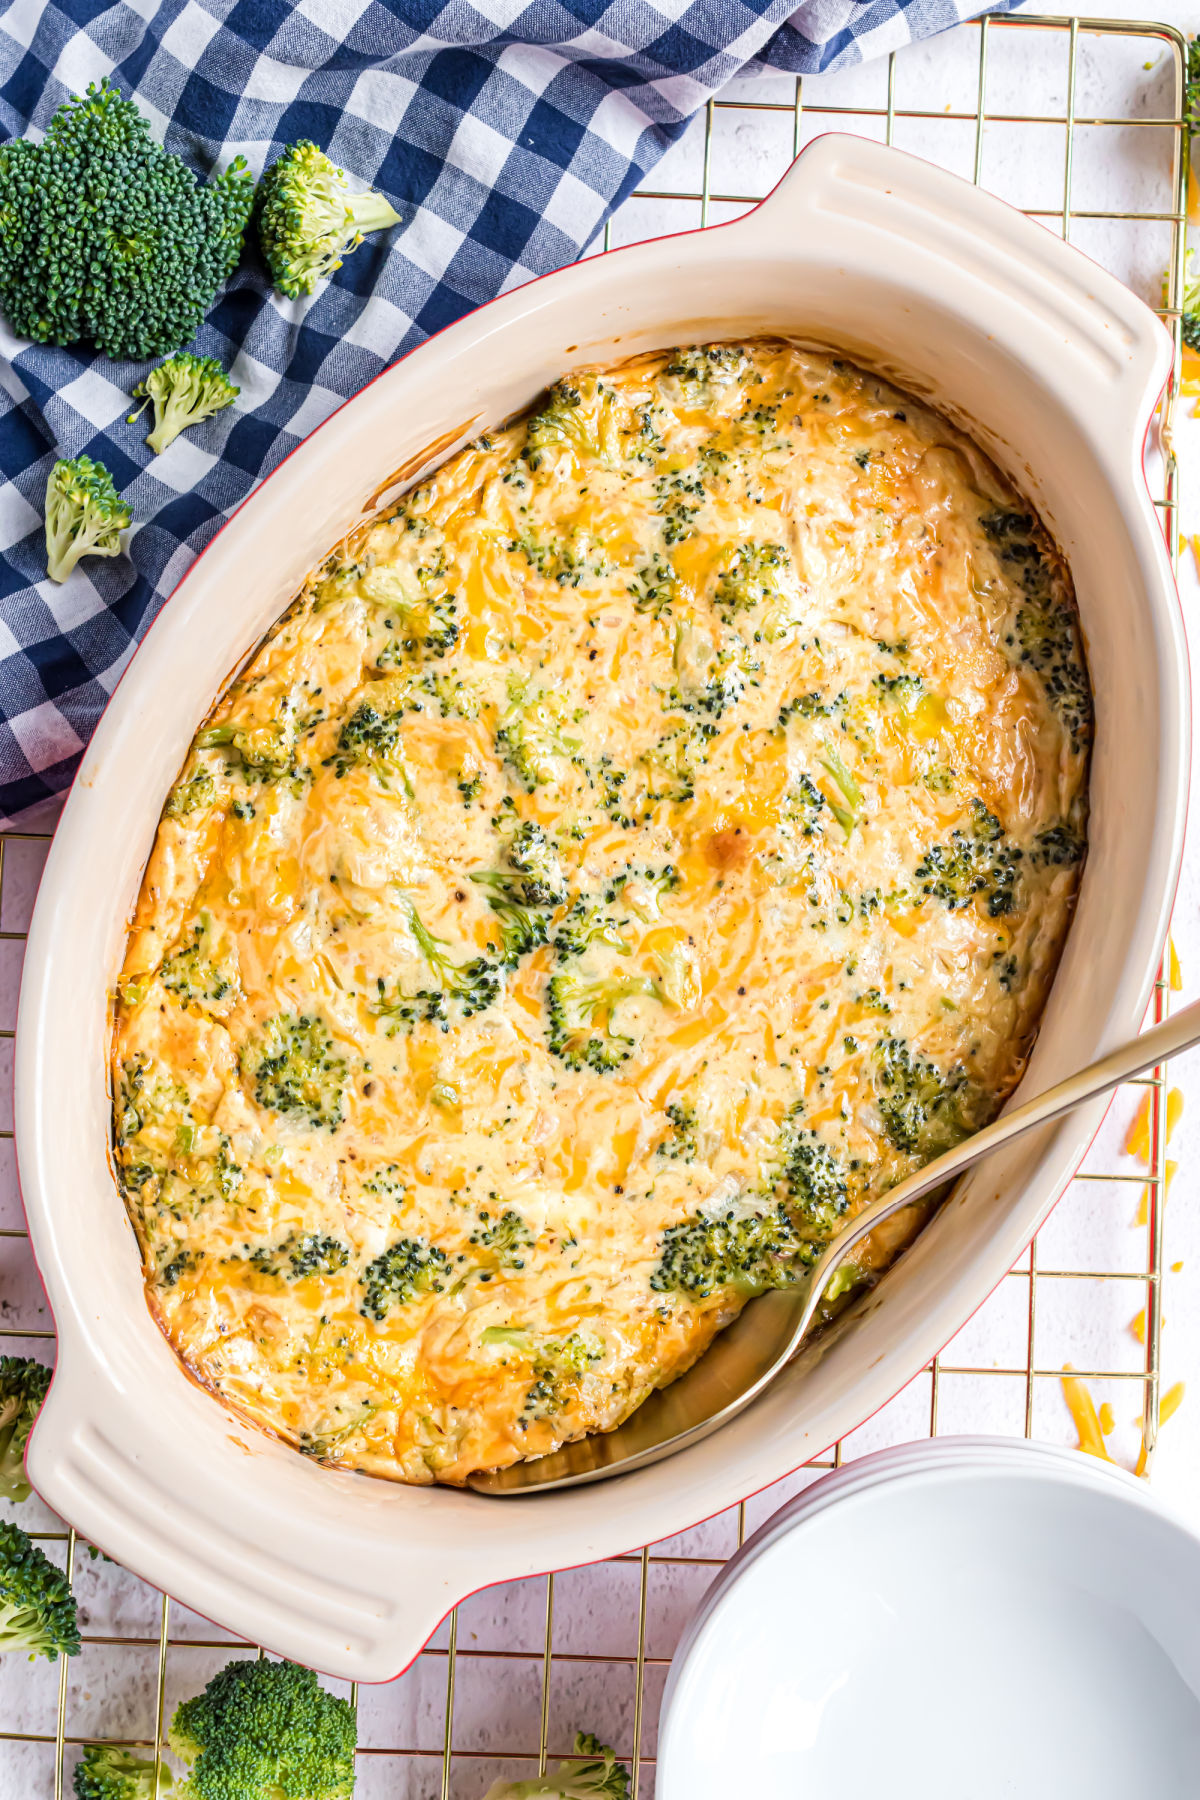 Broccoli cheese casserole baked in an oval baking dish.